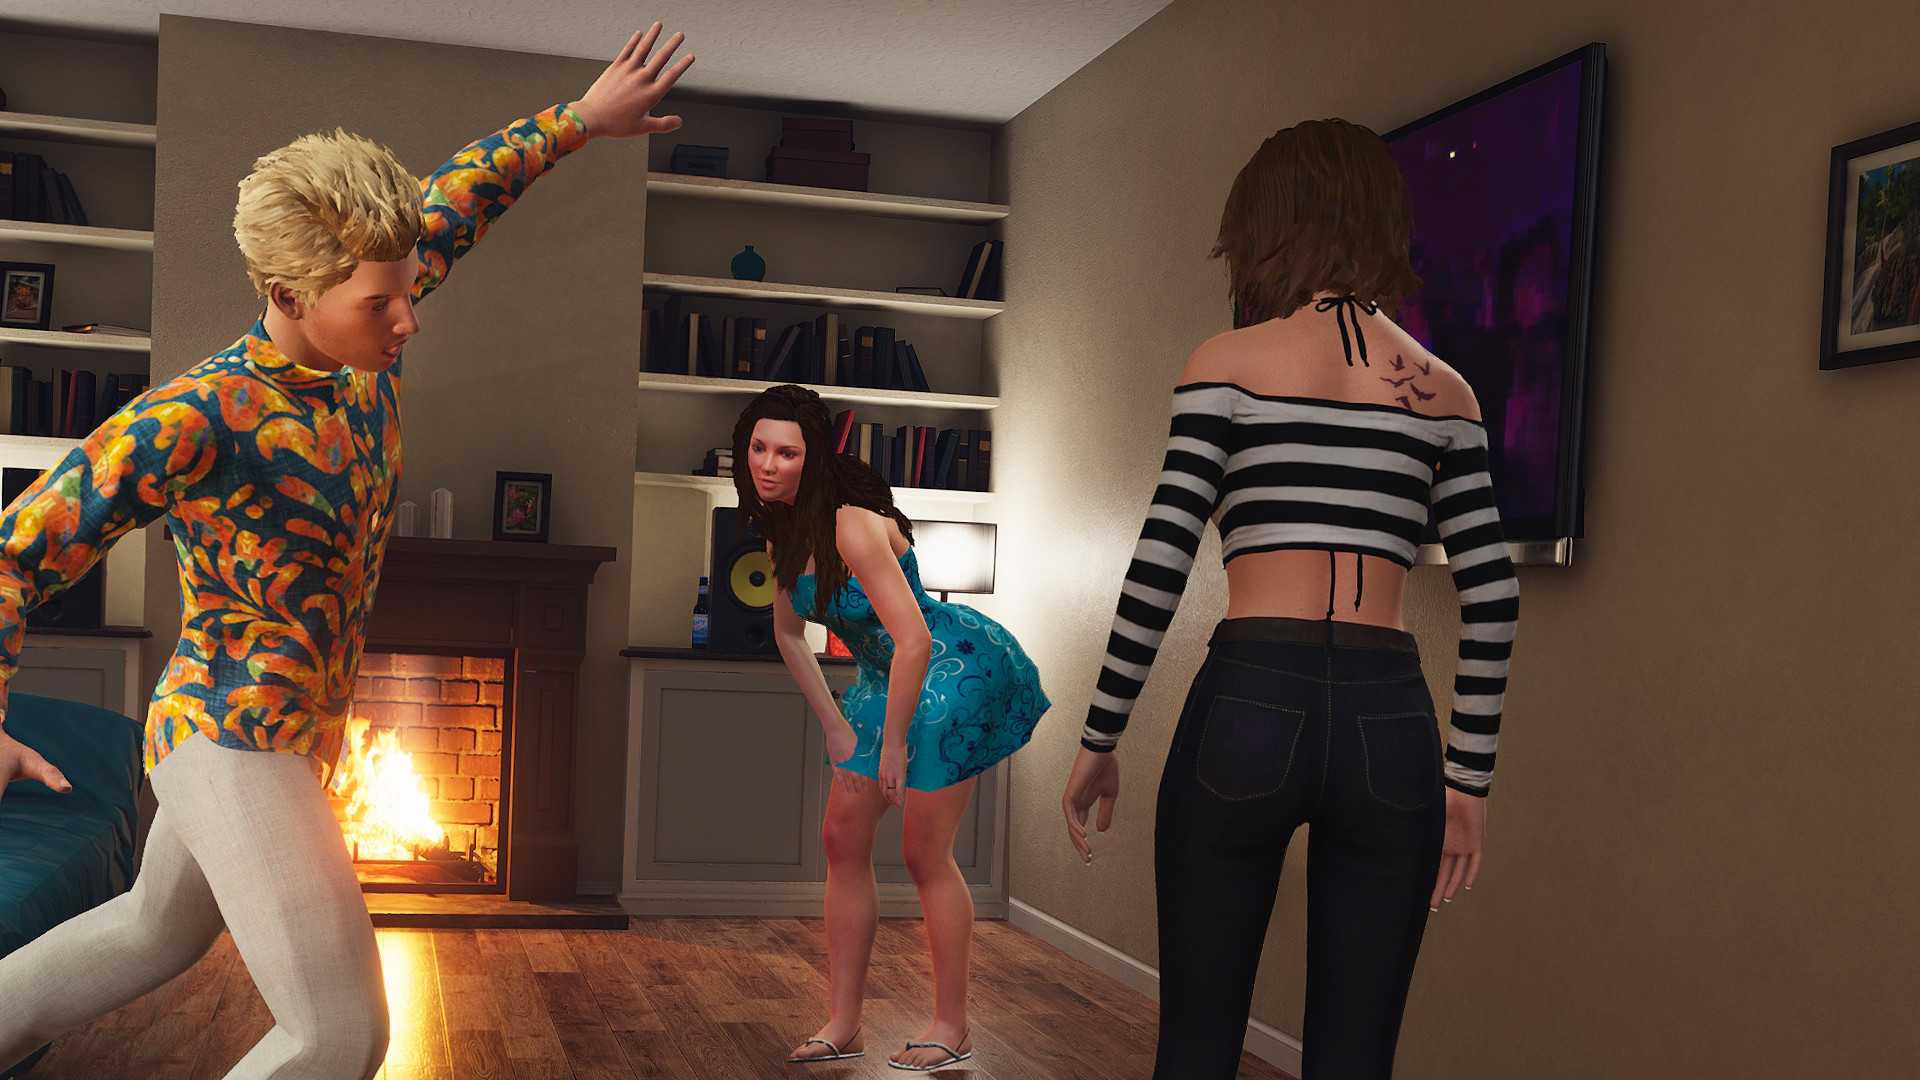 House Party screenshot